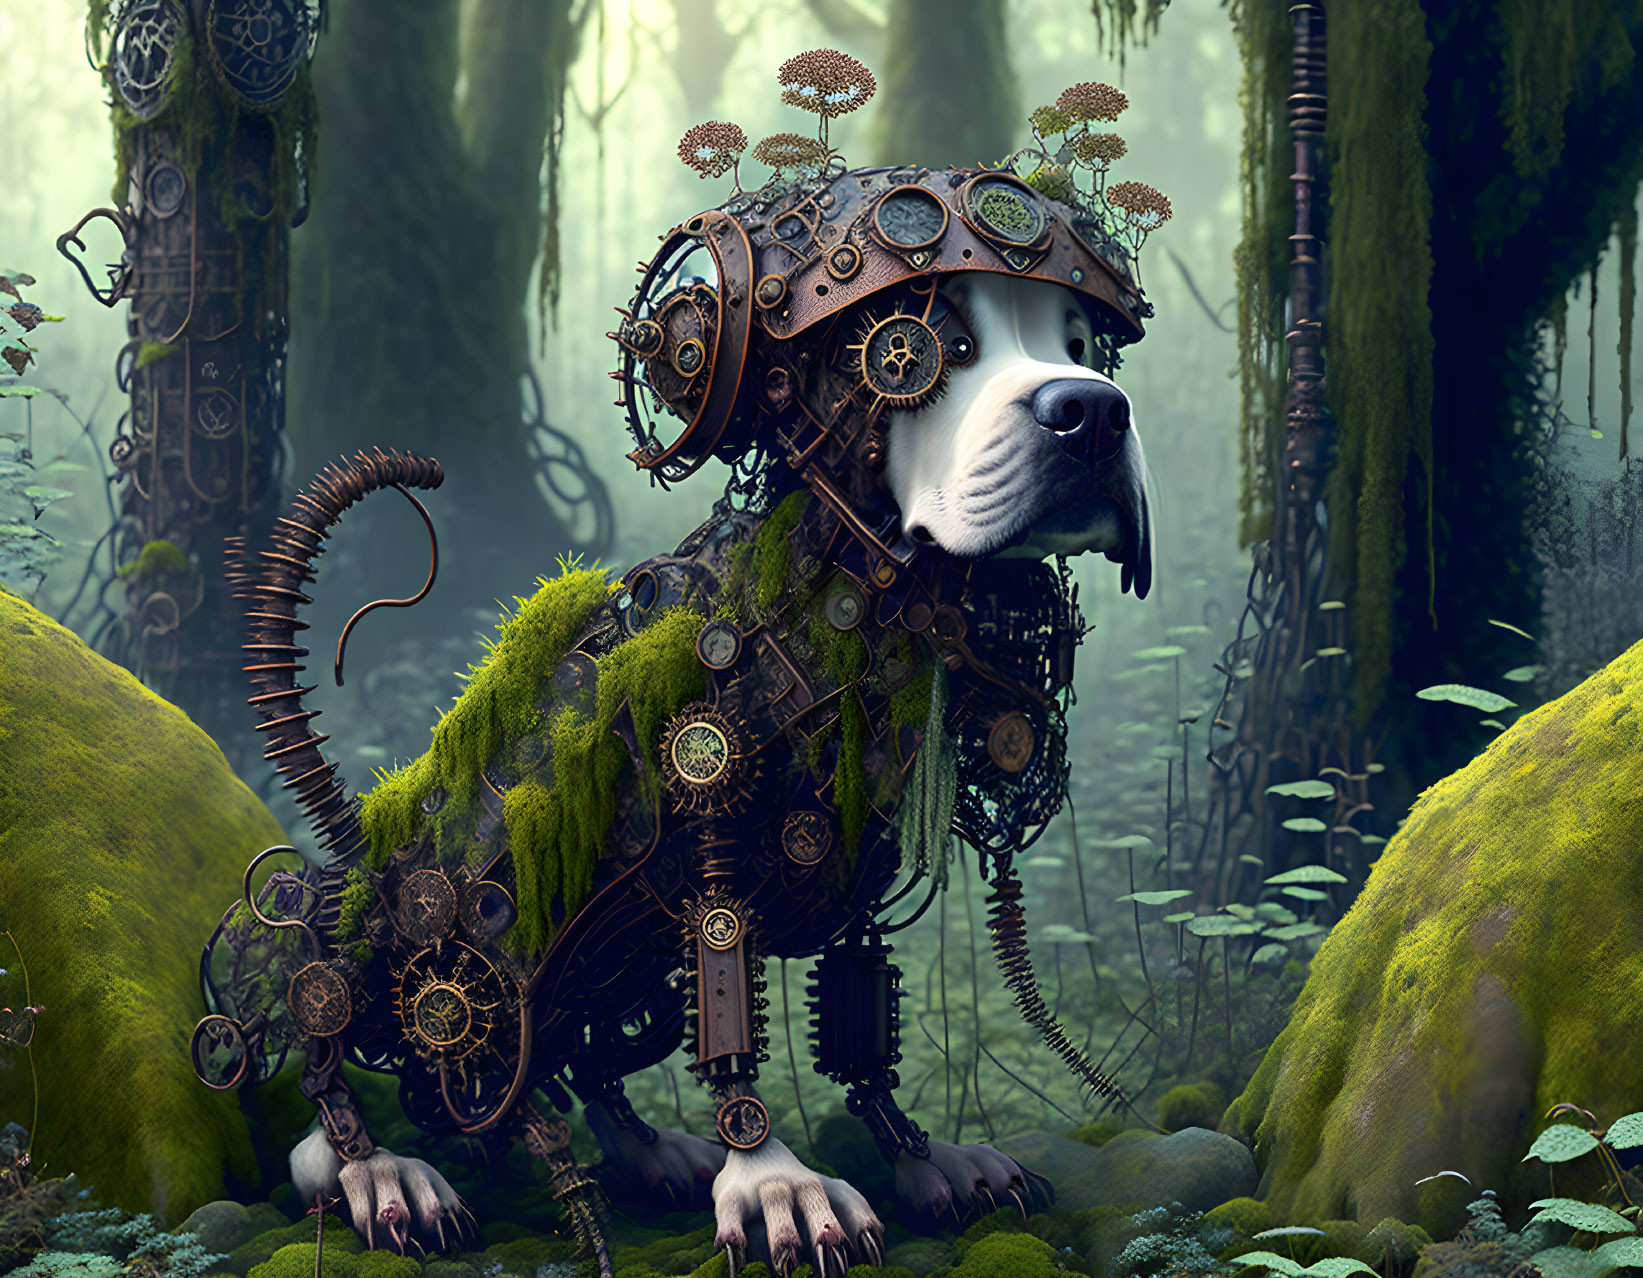 Mechanical dog covered in gears and plants in mystical forest